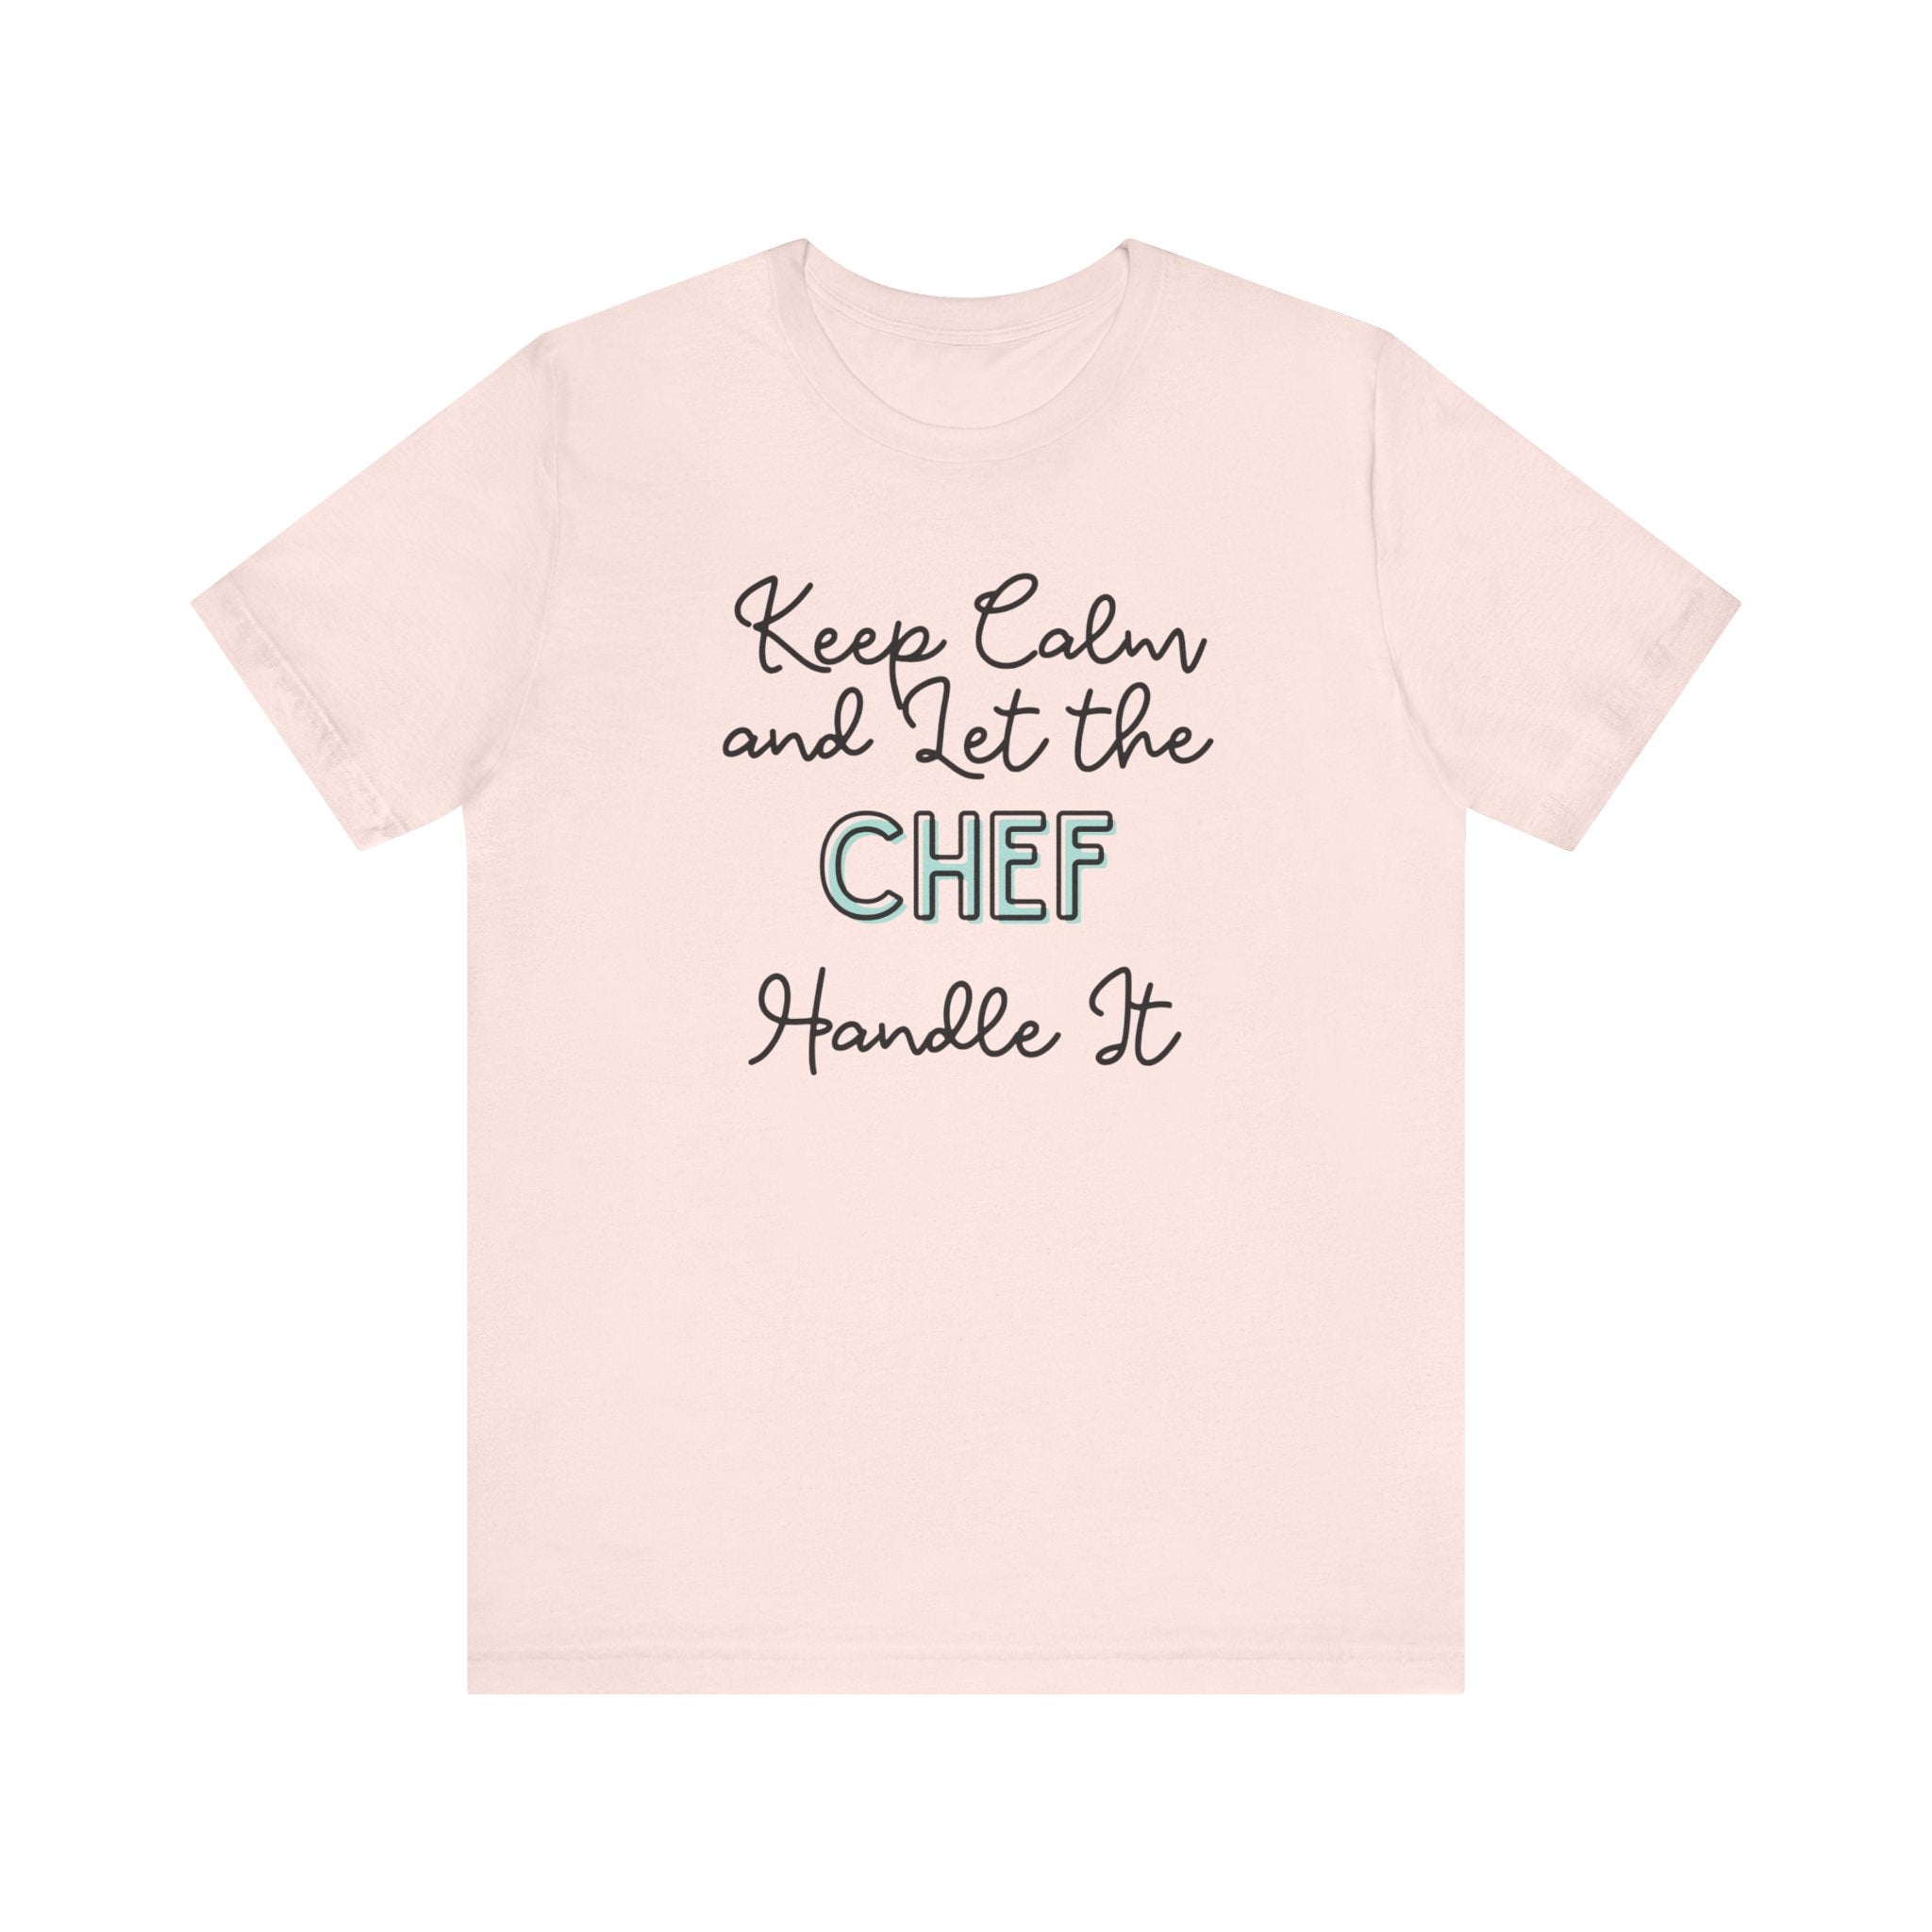 Keep Calm and let the Chef handle It - Jersey Short Sleeve Tee